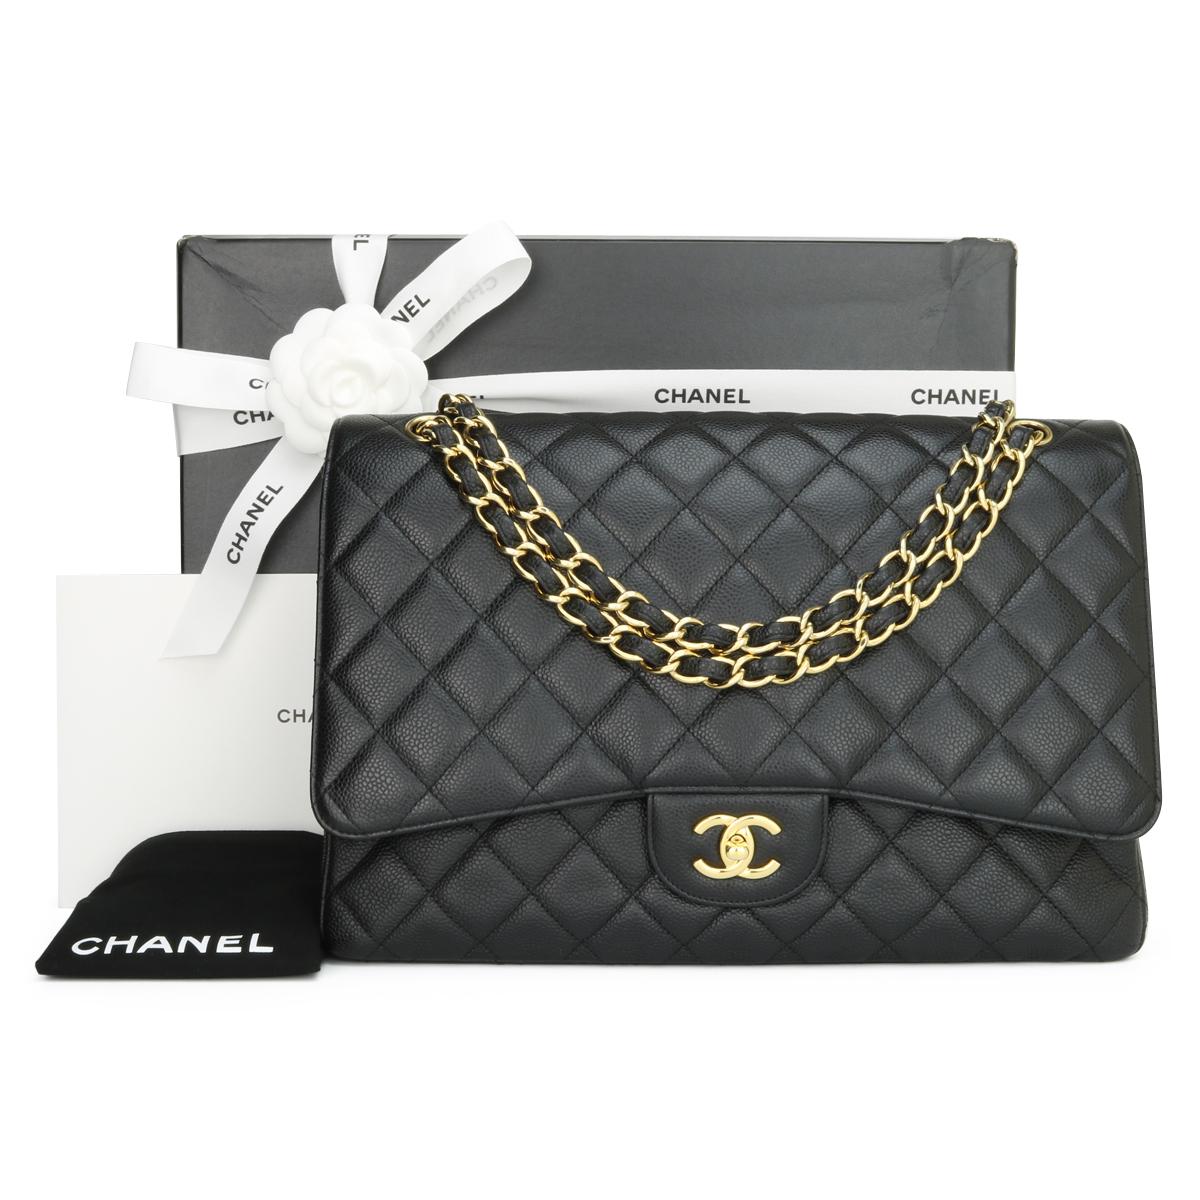 CHANEL Classic Single Flap Maxi Bag Black Caviar with Gold Hardware 2010.

This stunning bag is in very good condition, the bag still holds its shape well, and the hardware is still very shiny. It is such a lightweight bag compared to double flap